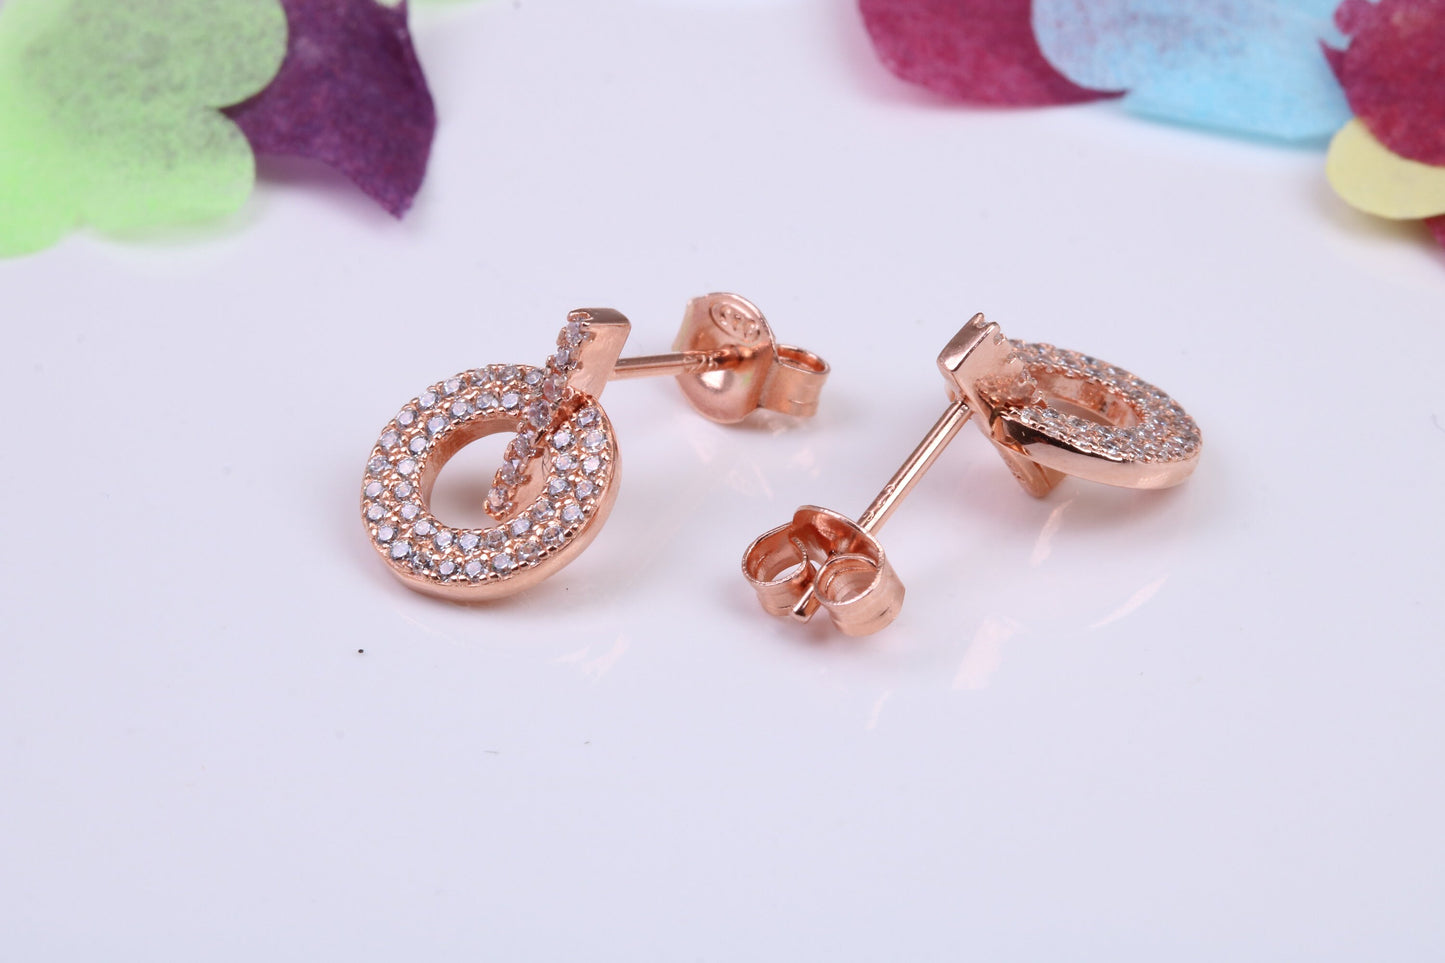 10 mm Round Cluster Cubic Zirconia set Dropper Earrings, Very Dressy, Made from Solid 925 Grade Sterling Silver, Rose Gold Plated